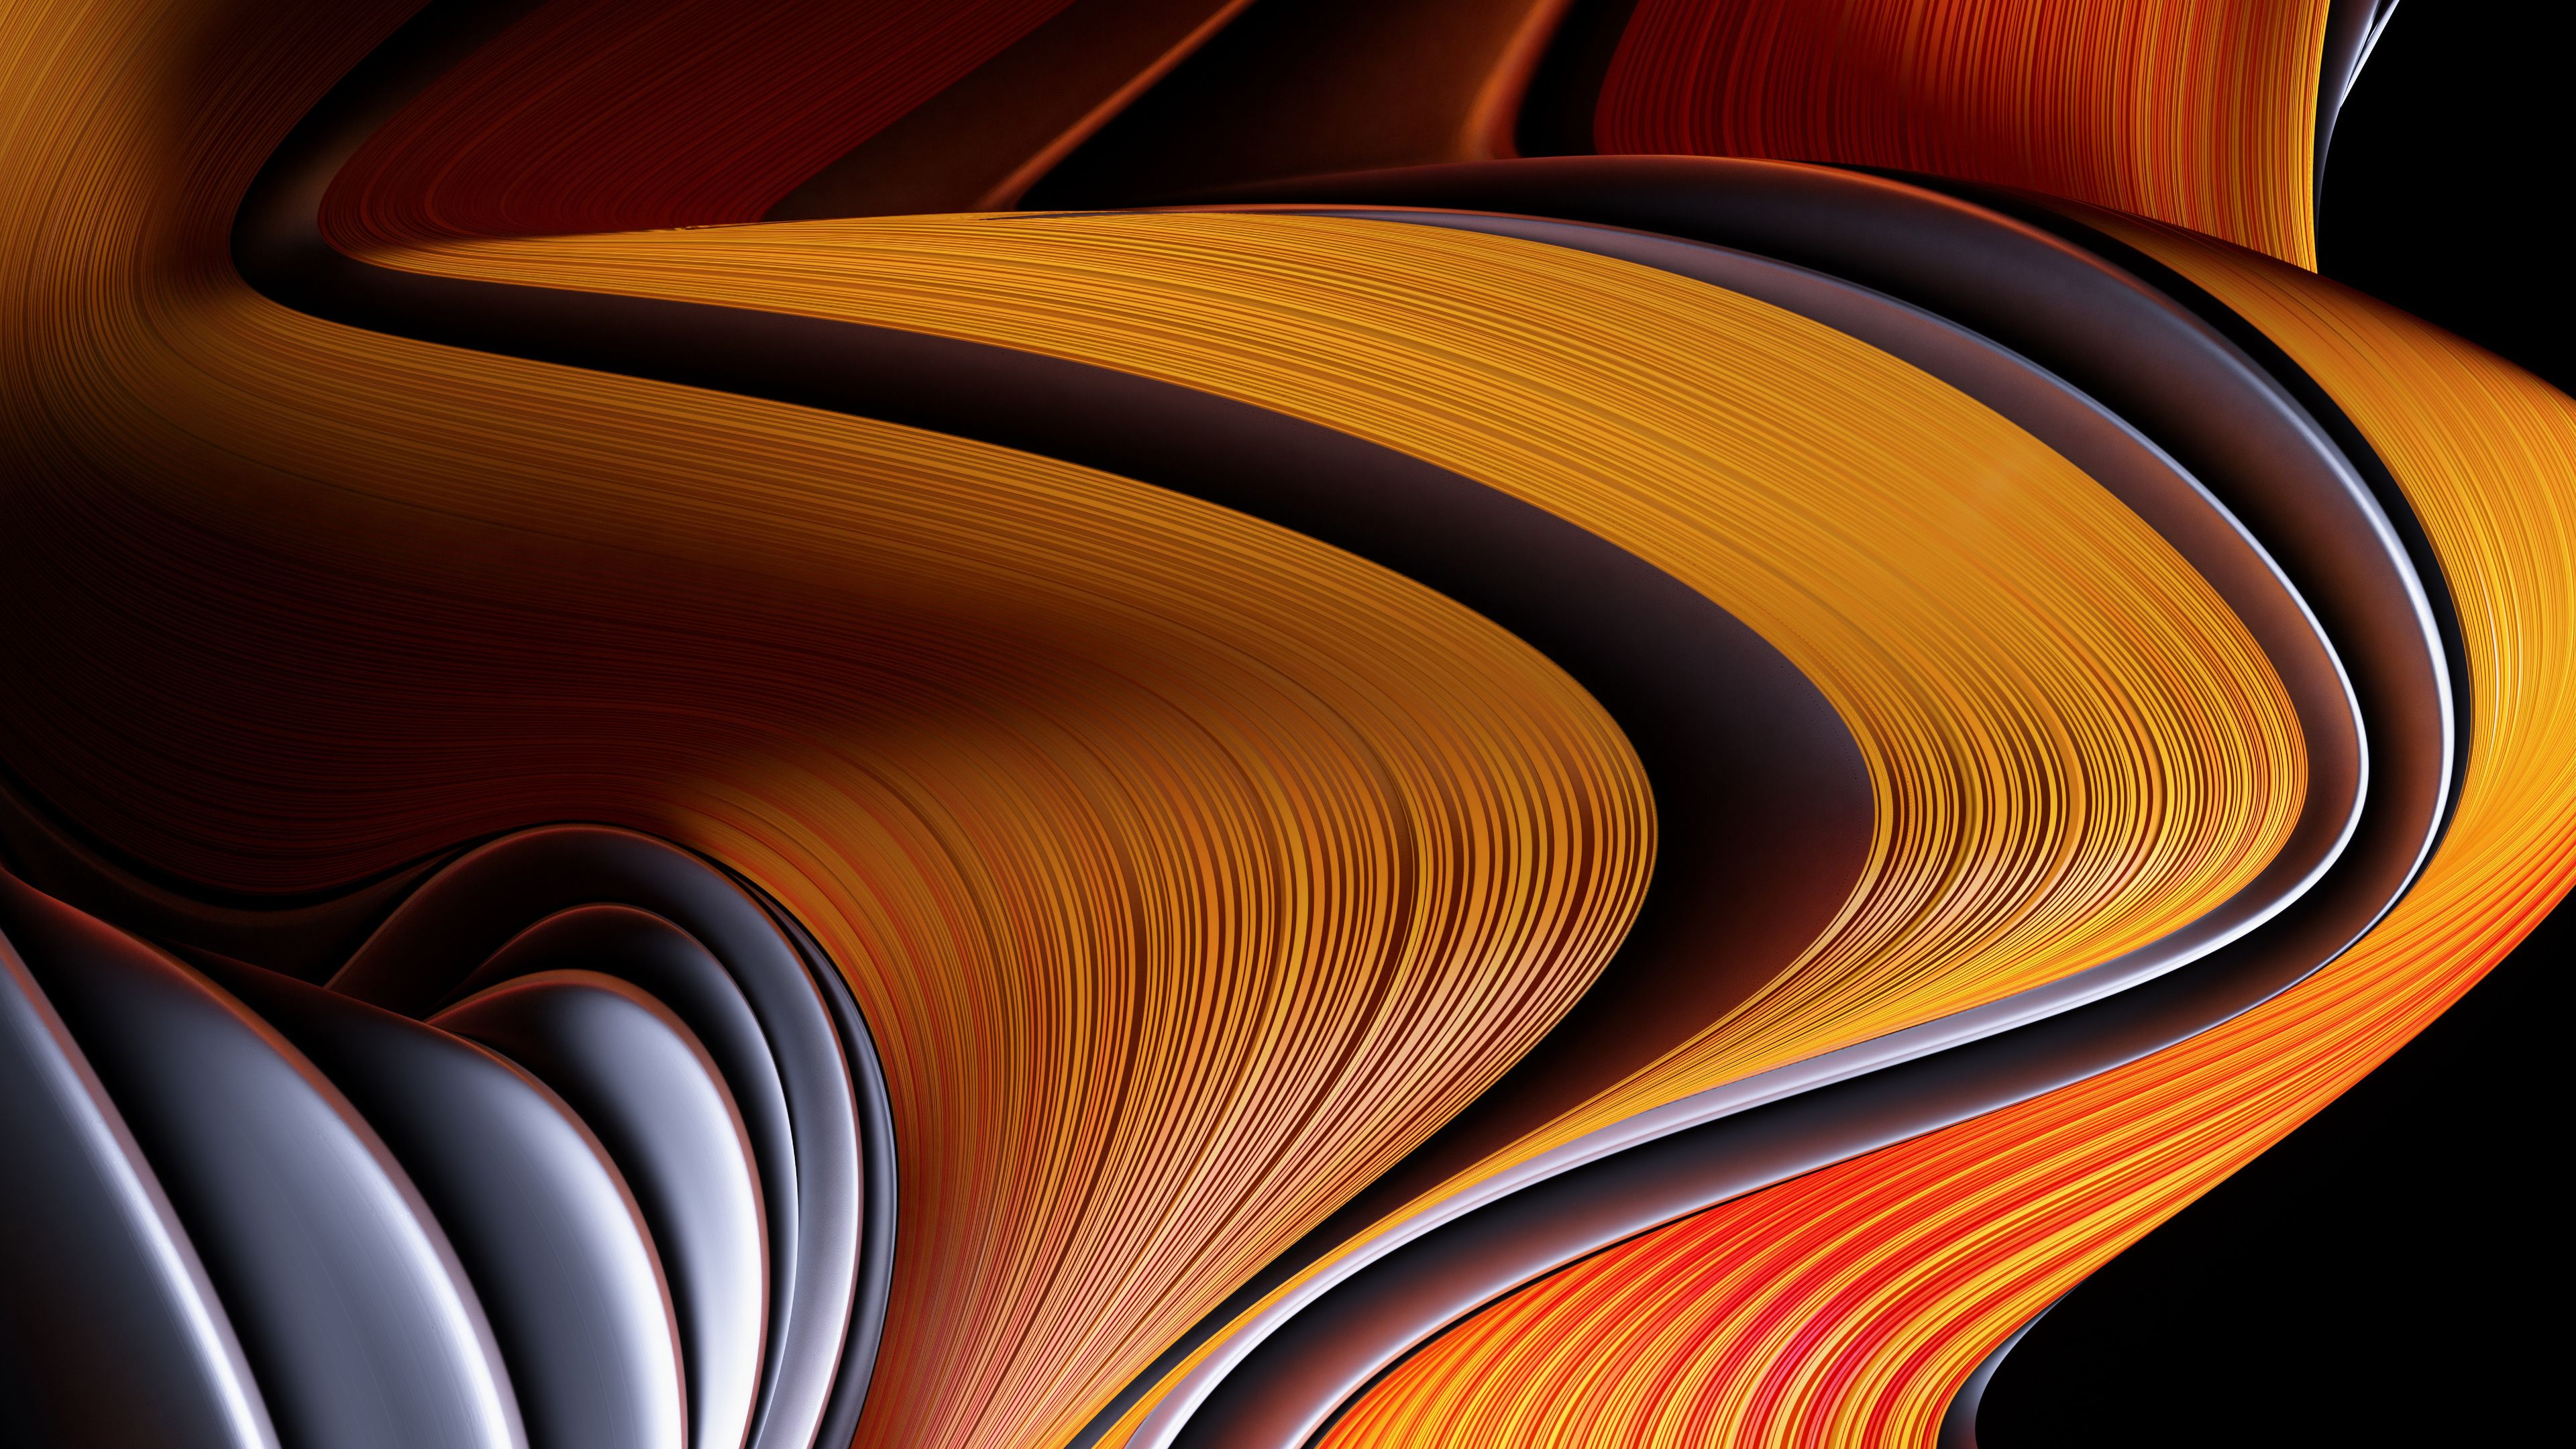 Wallpaper 4k Yellow Perfection Abstract 4k Wallpaper, Abstract Wallpaper, Behance Wallpaper, Digital Art Wallpaper, Hd Wallpaper, Yellow Wallpaper